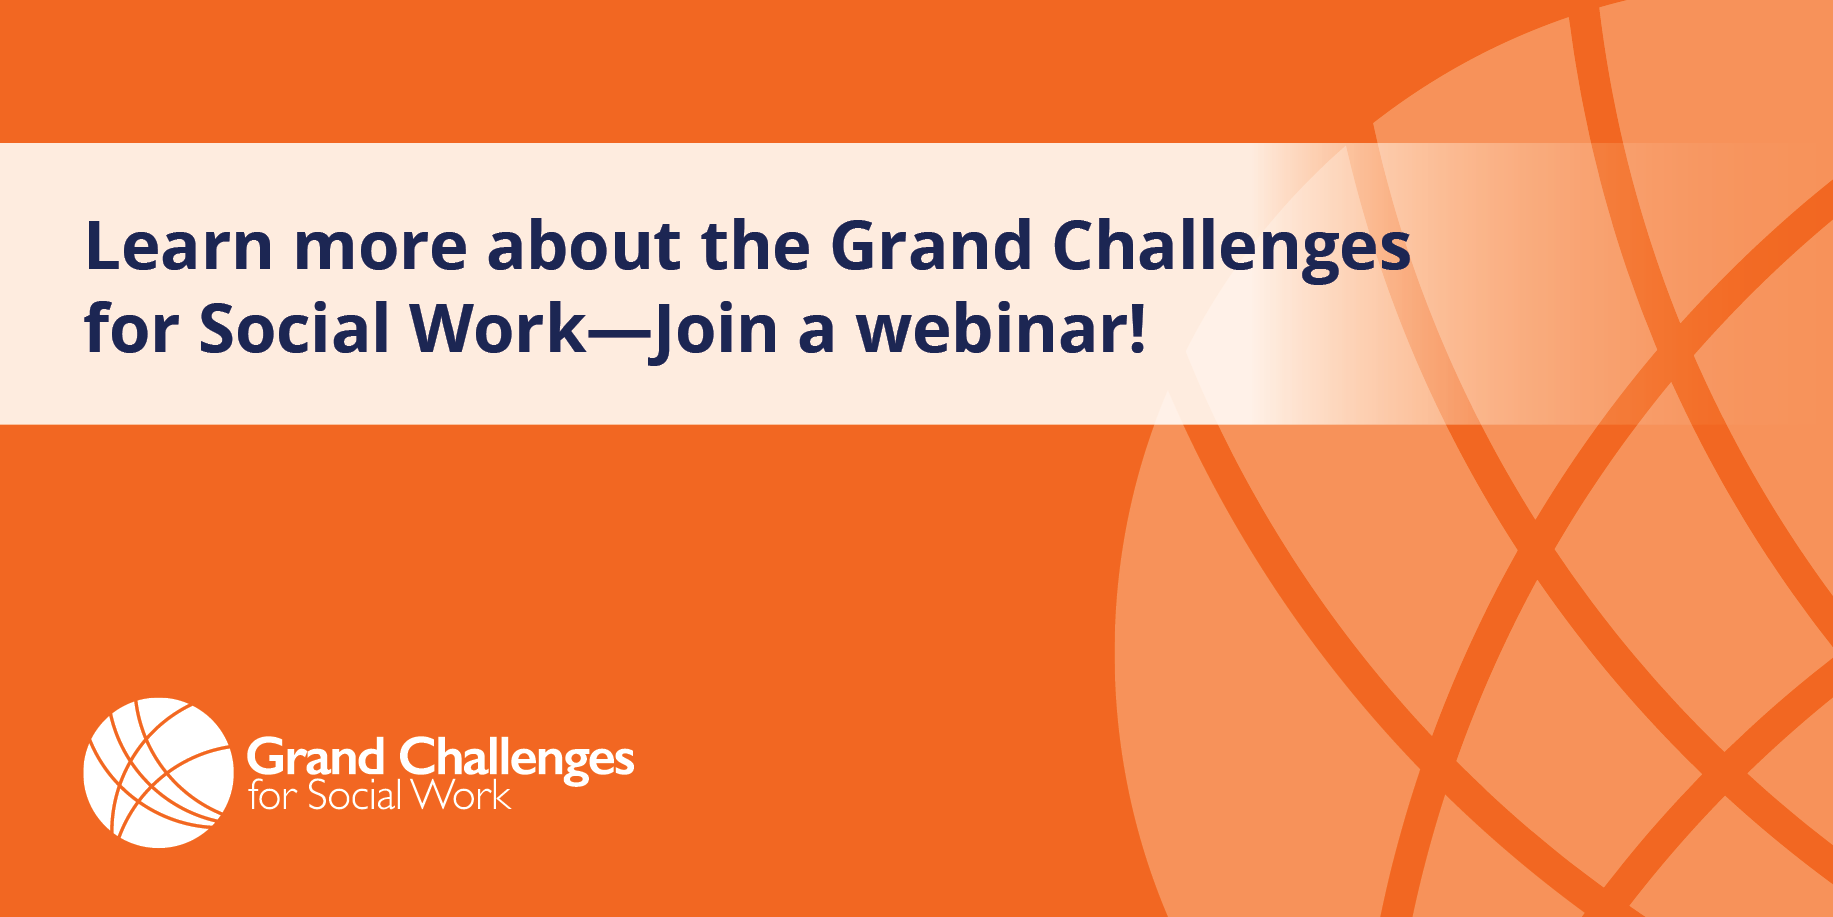 Join the Grand Challenges for Social Work Webinar, Harness Technology for  Social Good, on March 6, 2018, 11 am EST/ 10 am CST/ 8 am PST